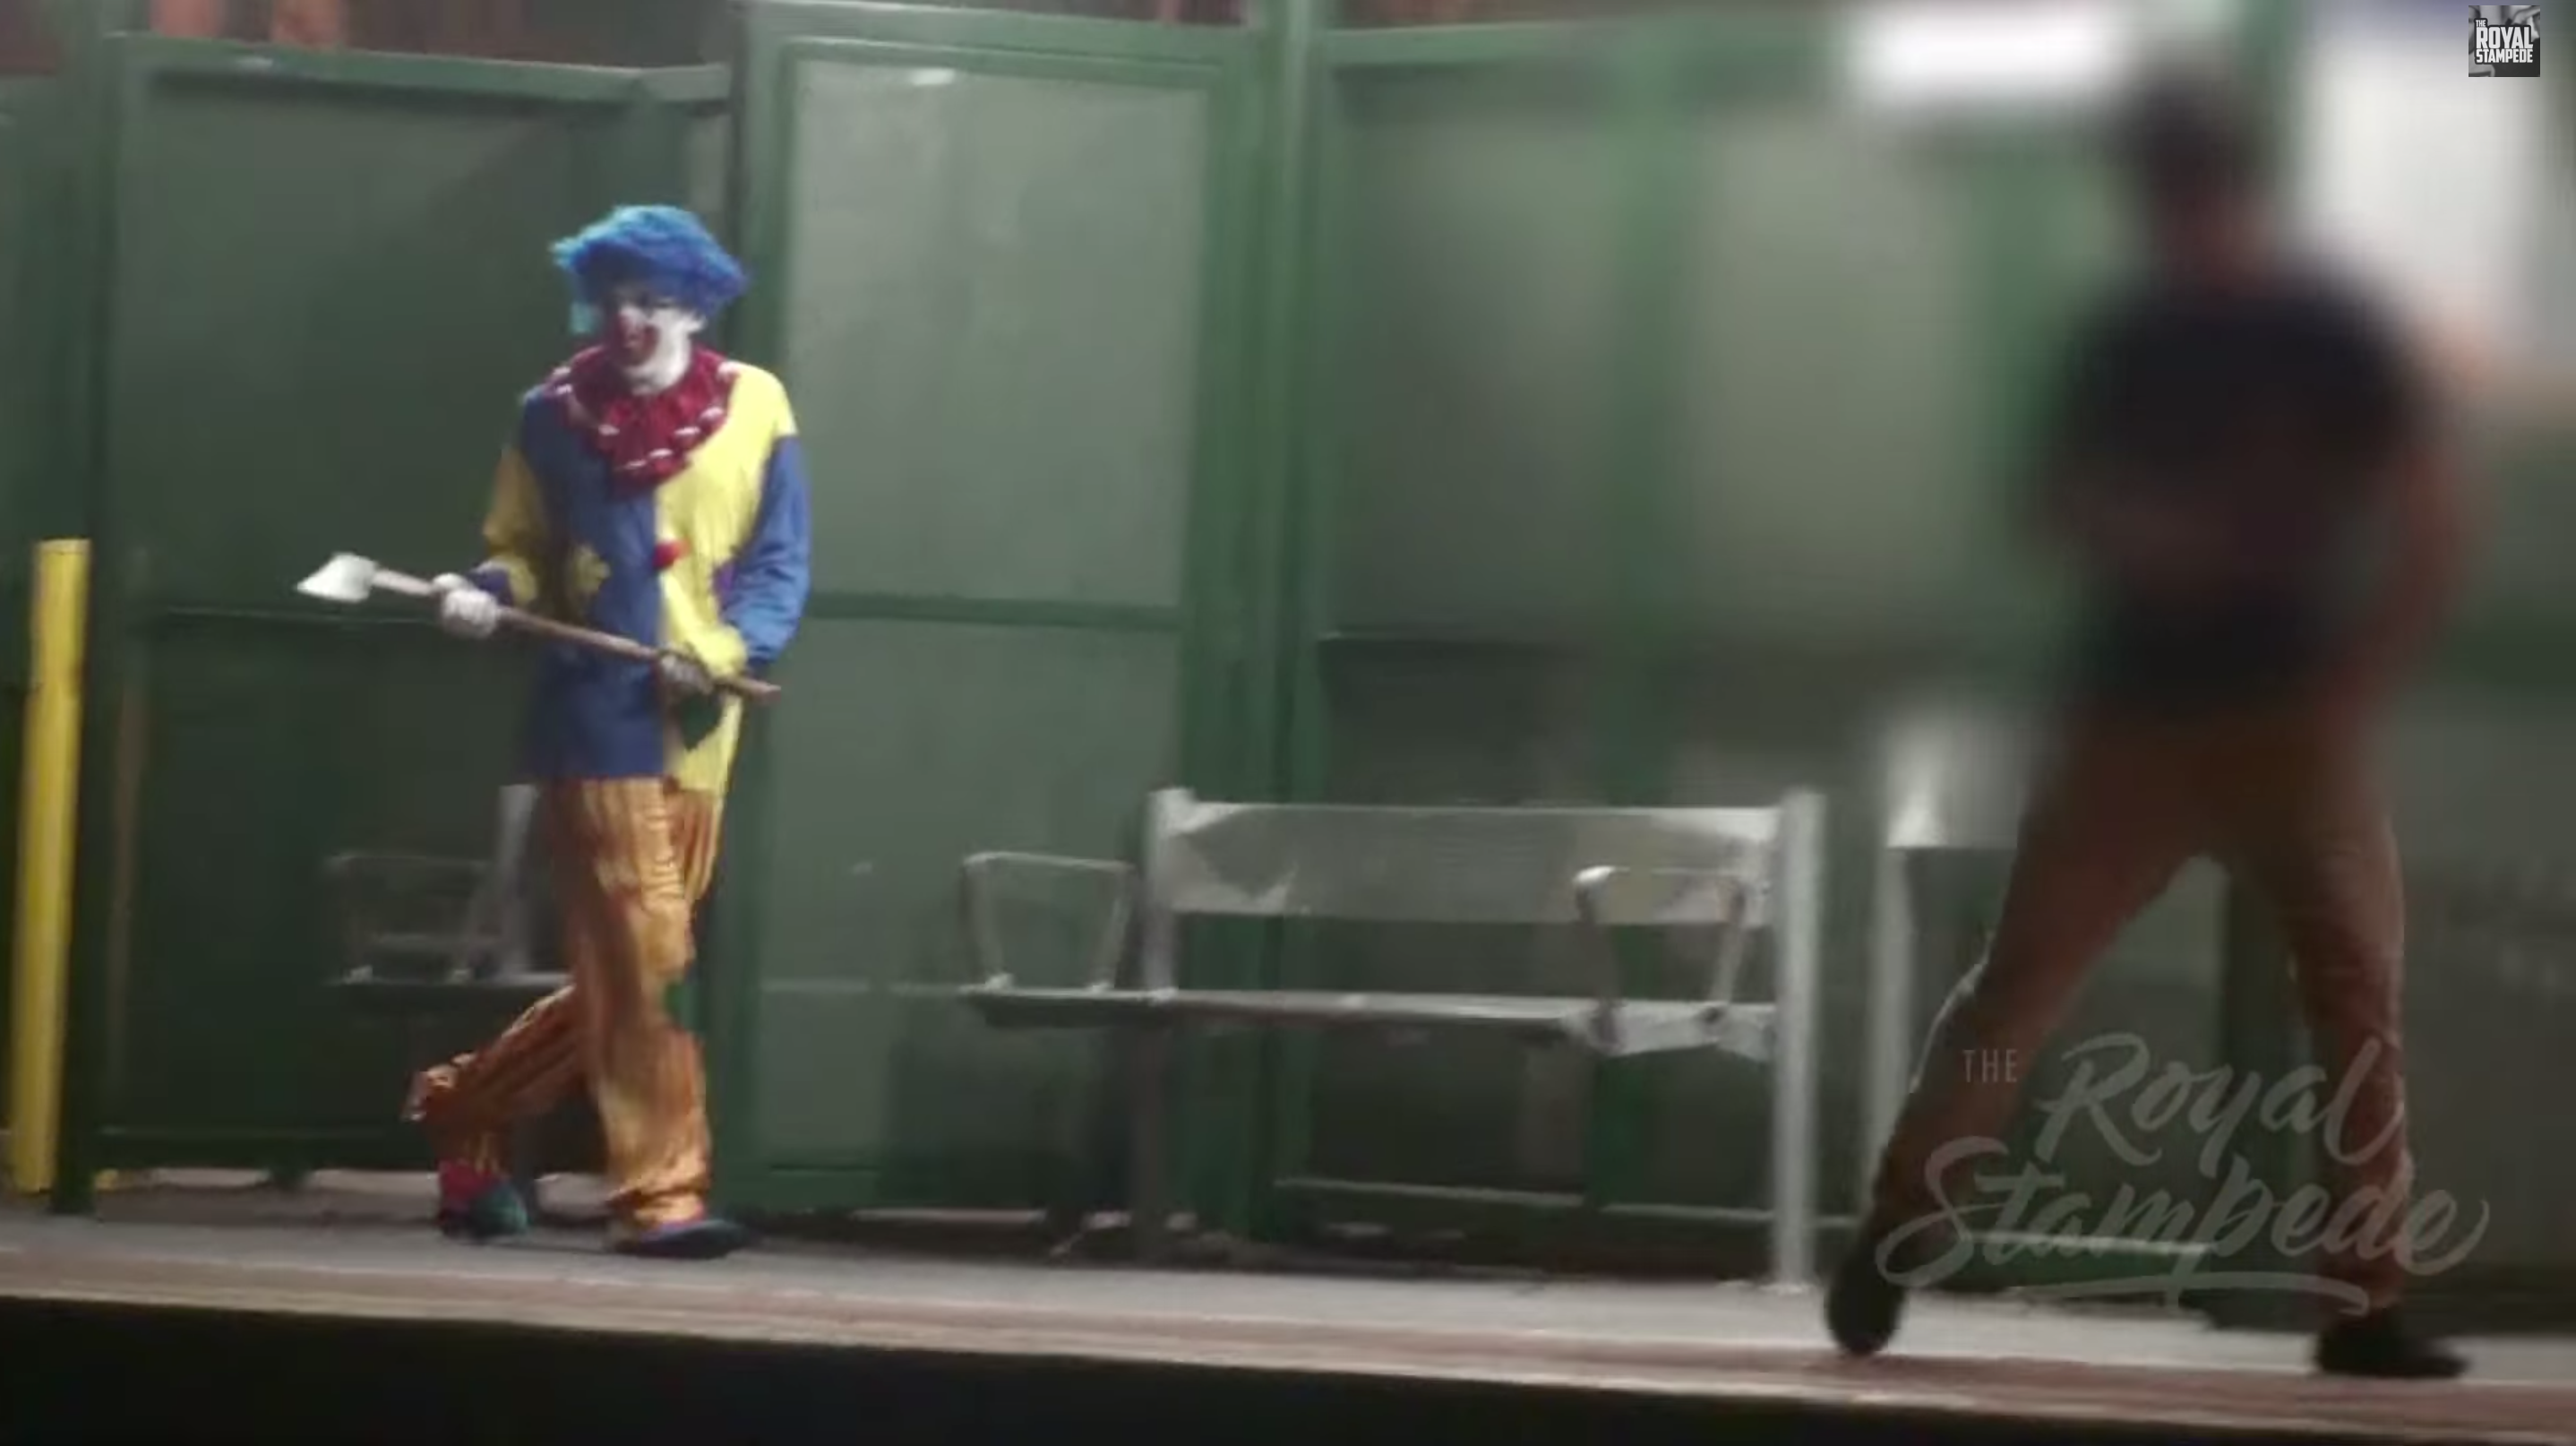 Clown Axe Murderer Scare Prank Part 2 - The Royal Stampede